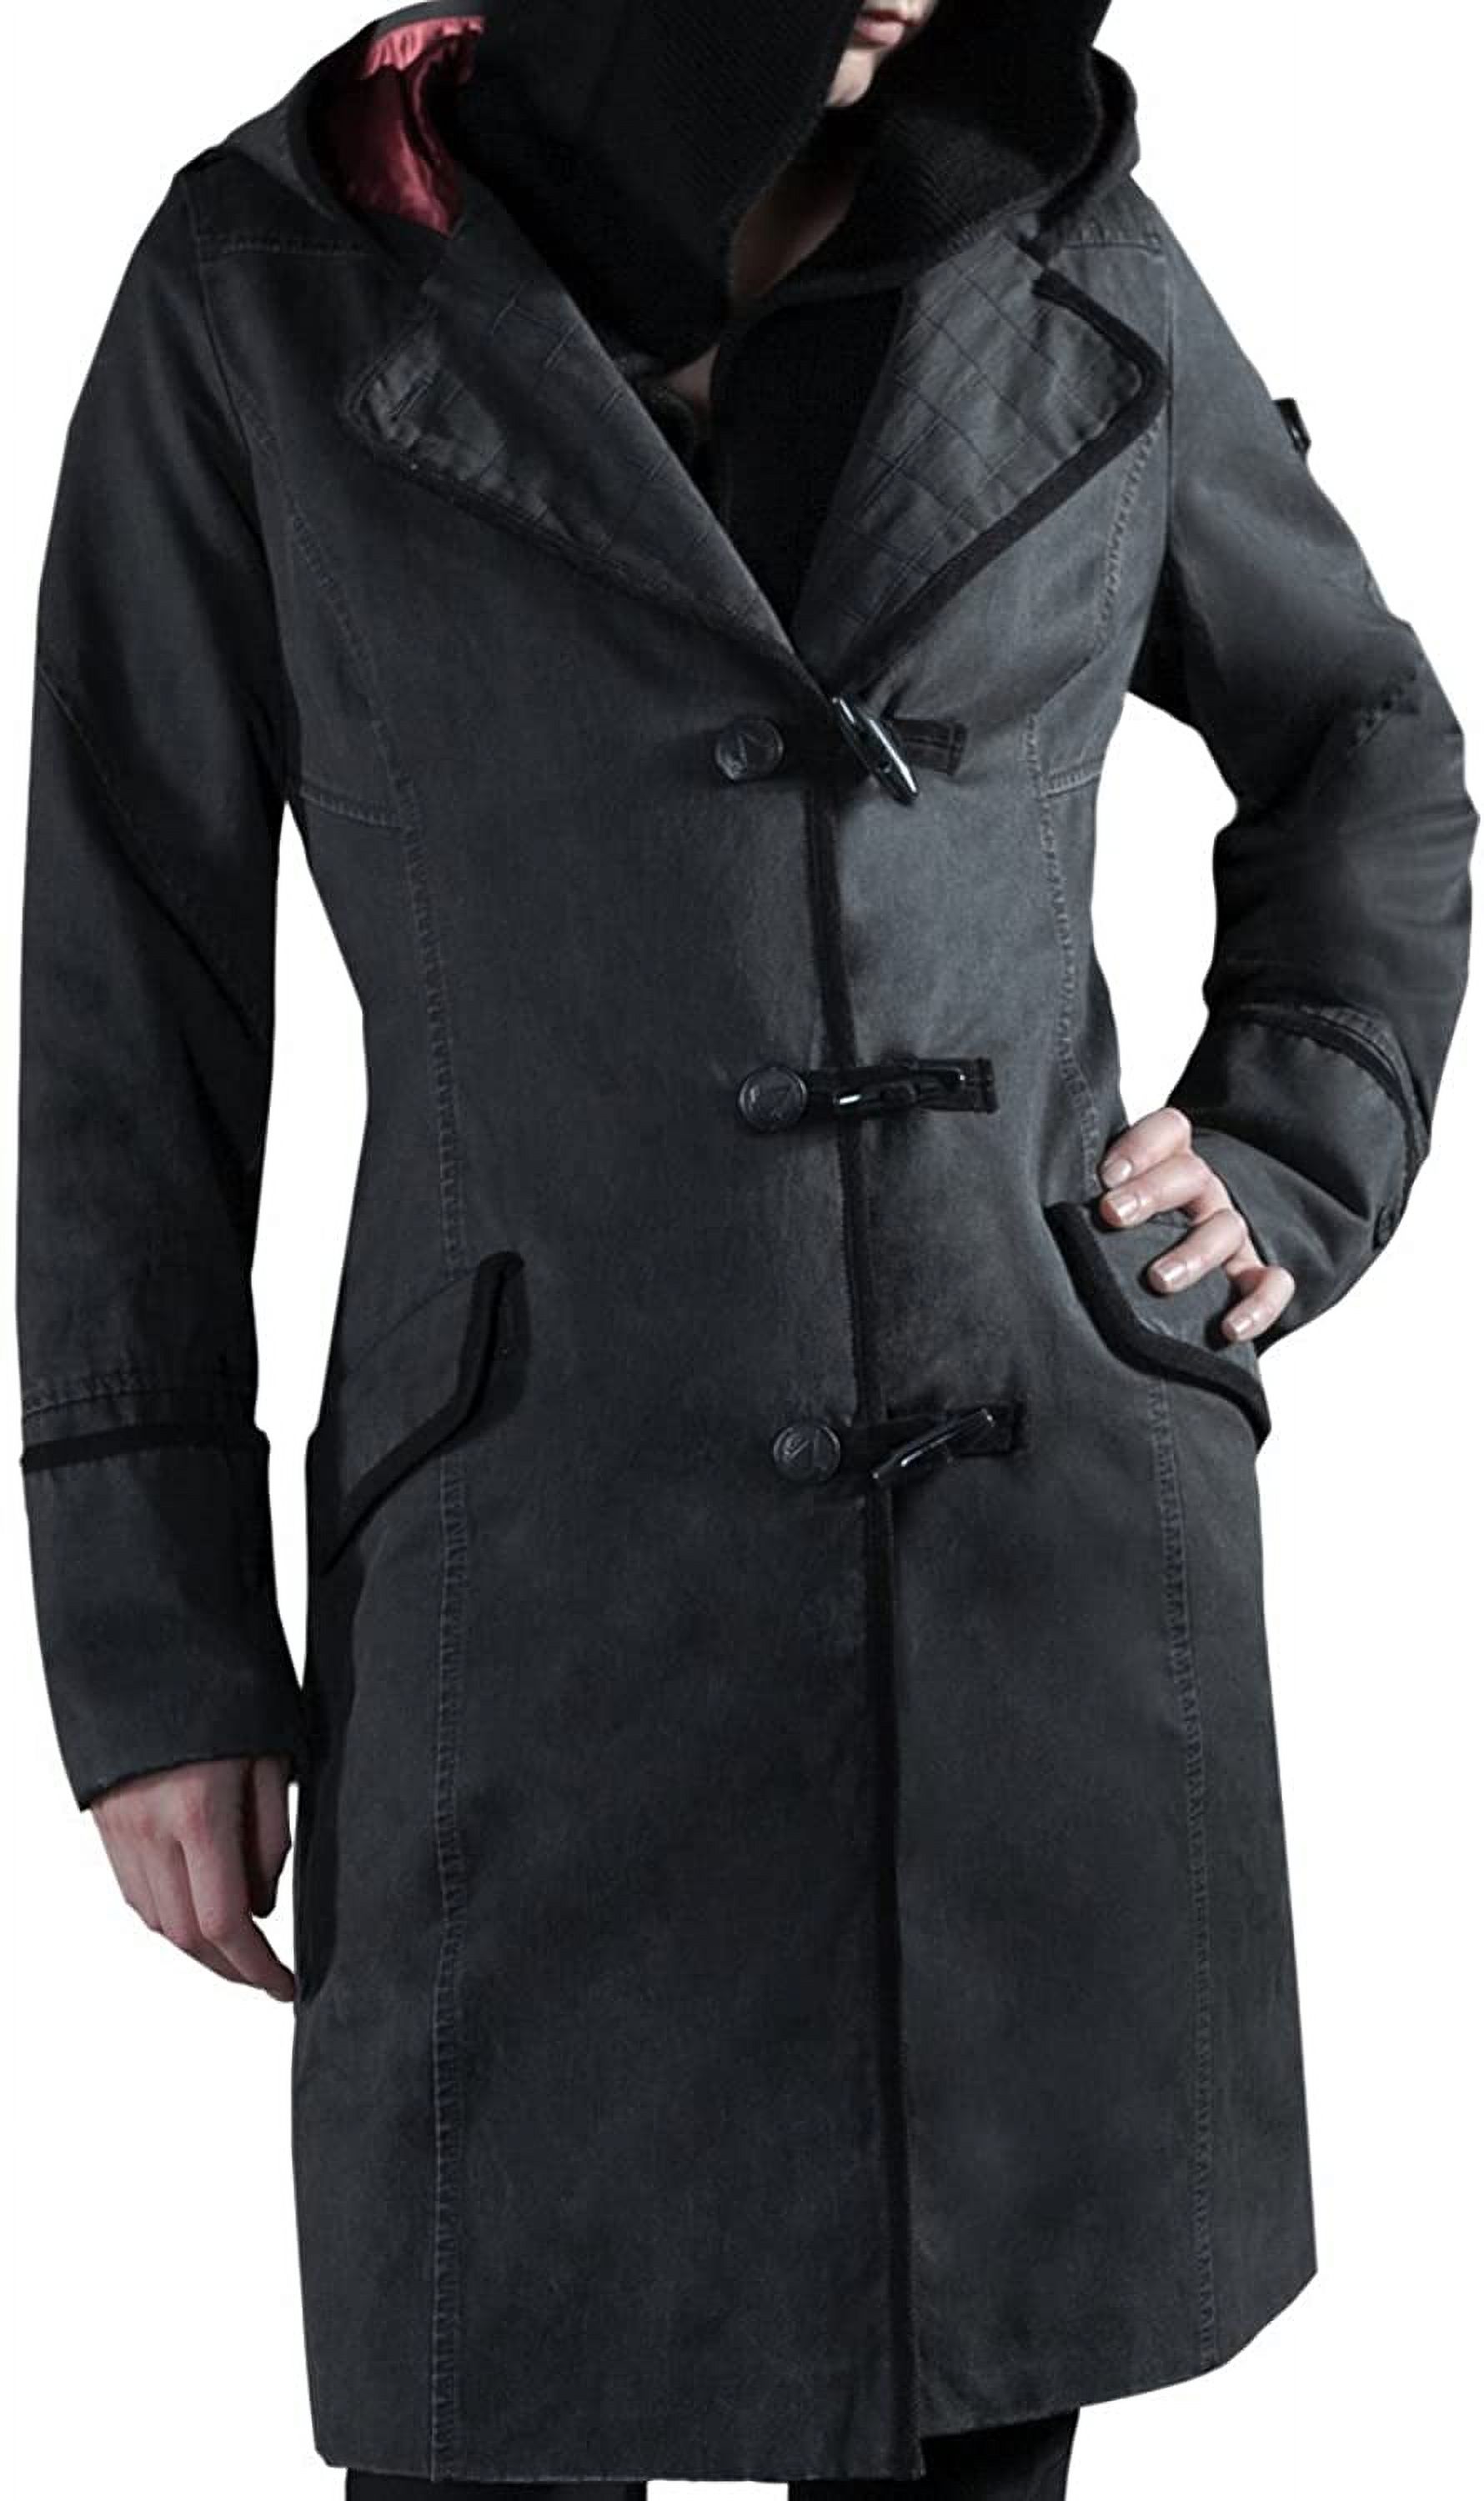 Musterbrand GRAY Assassin's Creed Syndicate Evie Hooded Coat, US Small - image 2 of 5